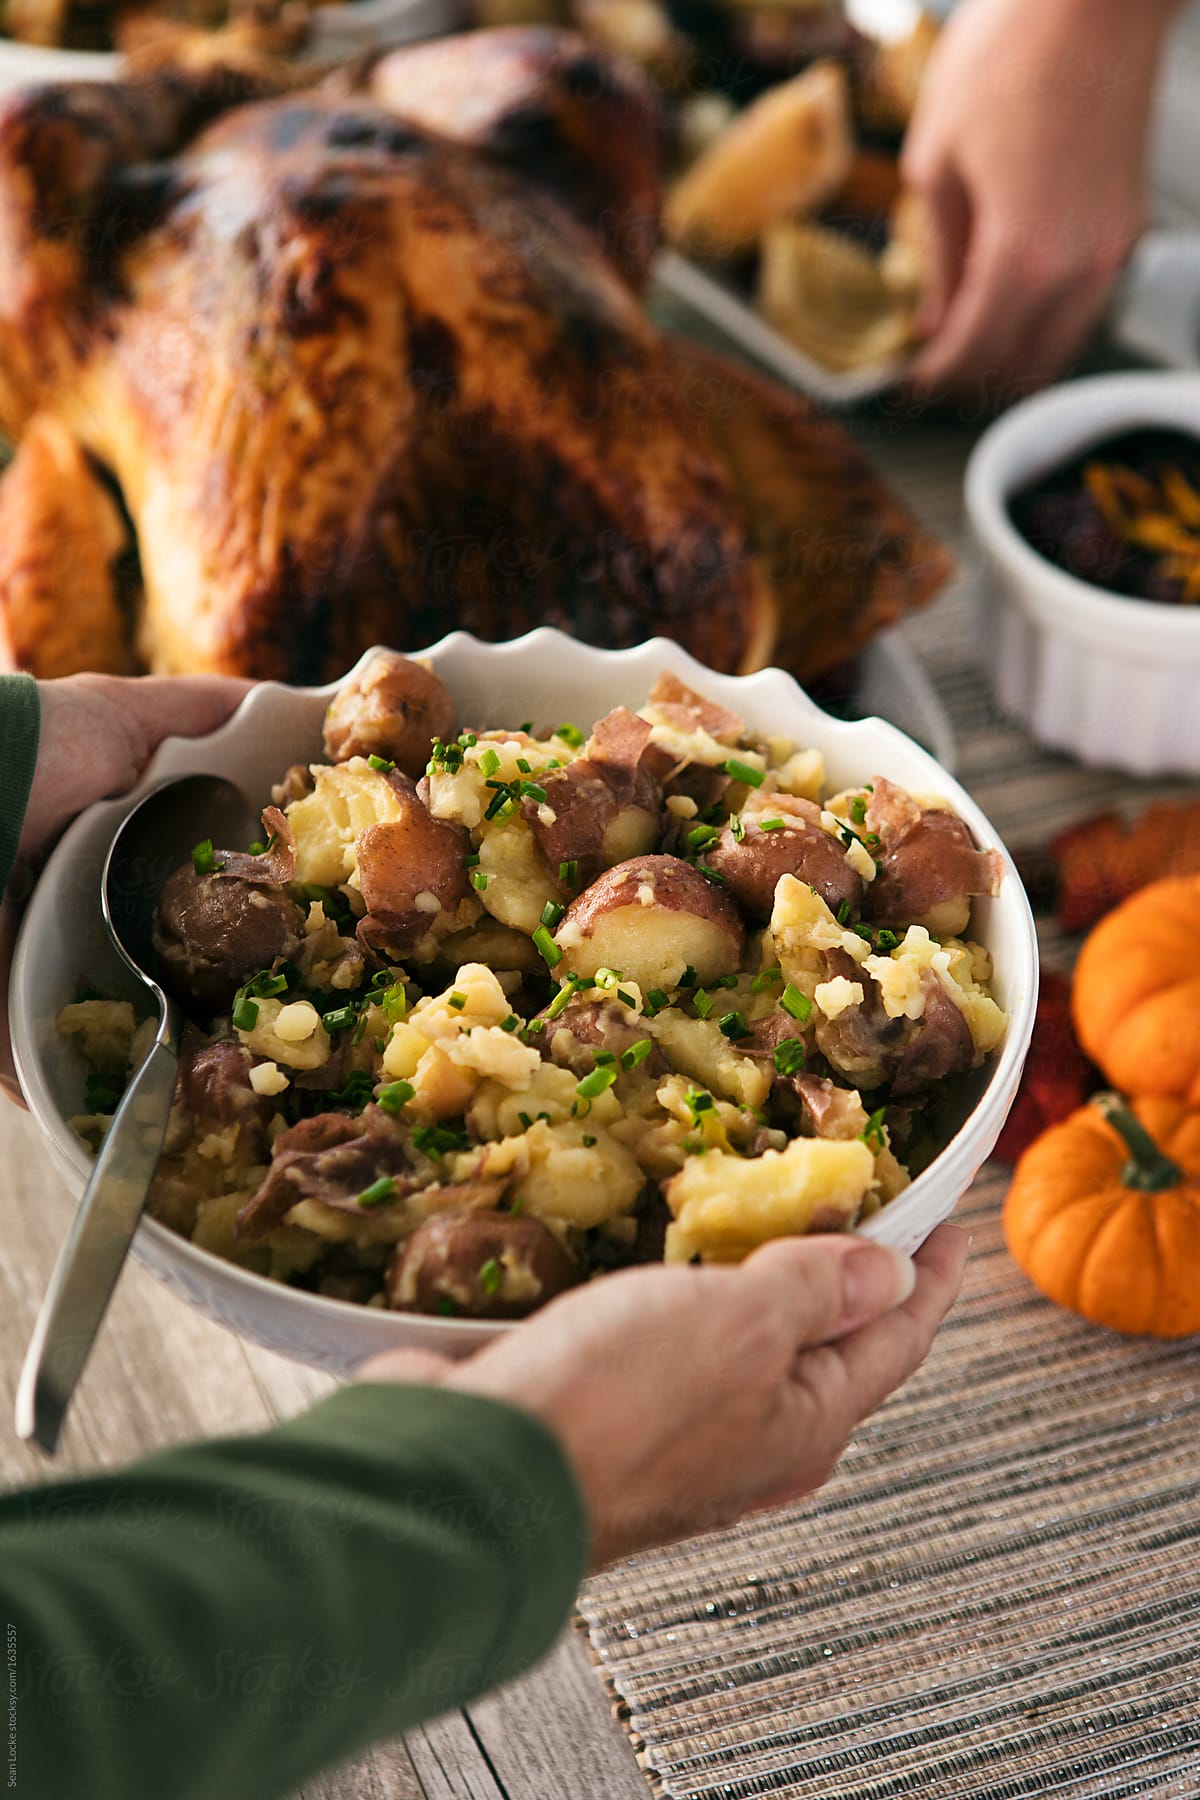 Thanksgiving: Woman Puts Bowl Of Smashed Potatoes On Table